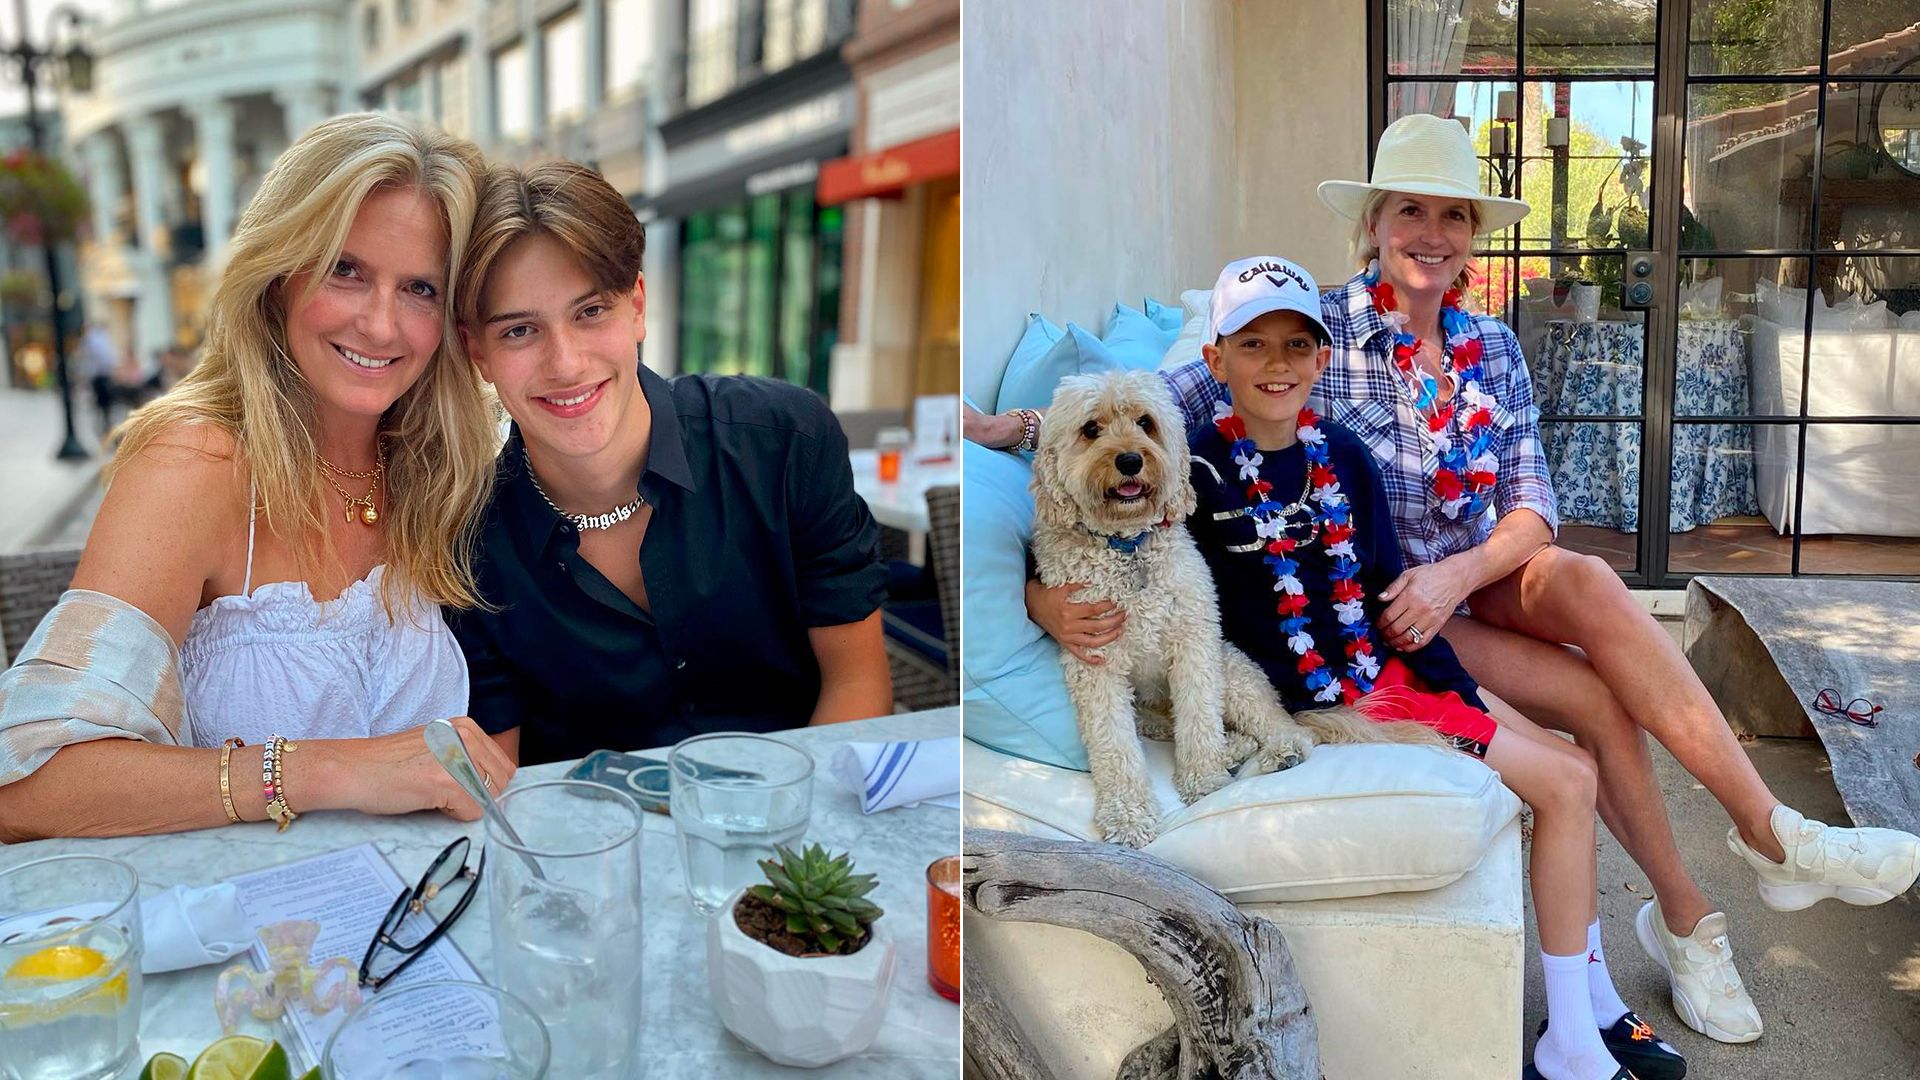 Split image of Penny Lancaster with her son Alastair at dinner, and another of Penny with her son Aiden on holiday